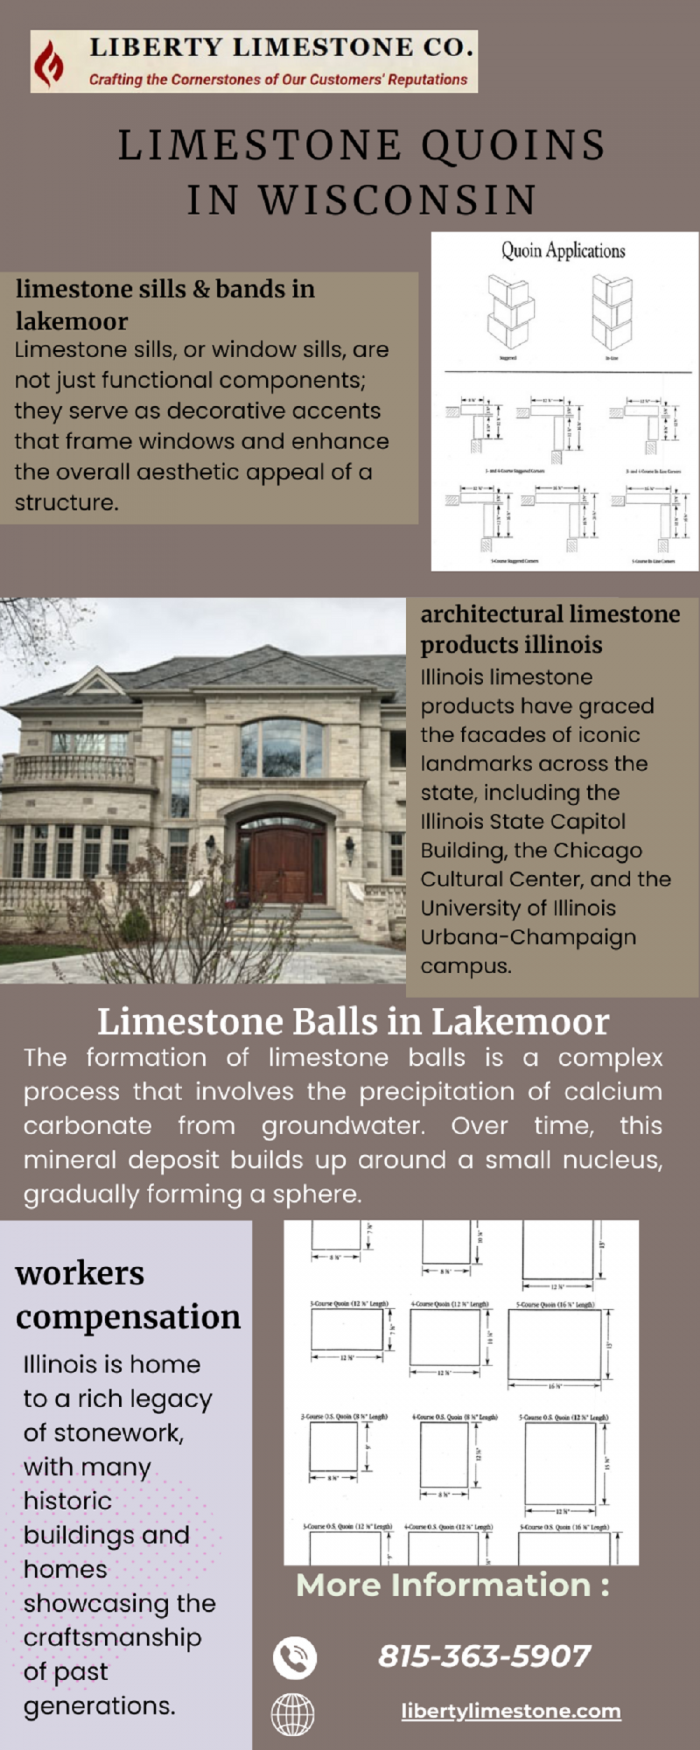 Liberty Limestone — Your Source for Limestone Quoins in Wisconsin